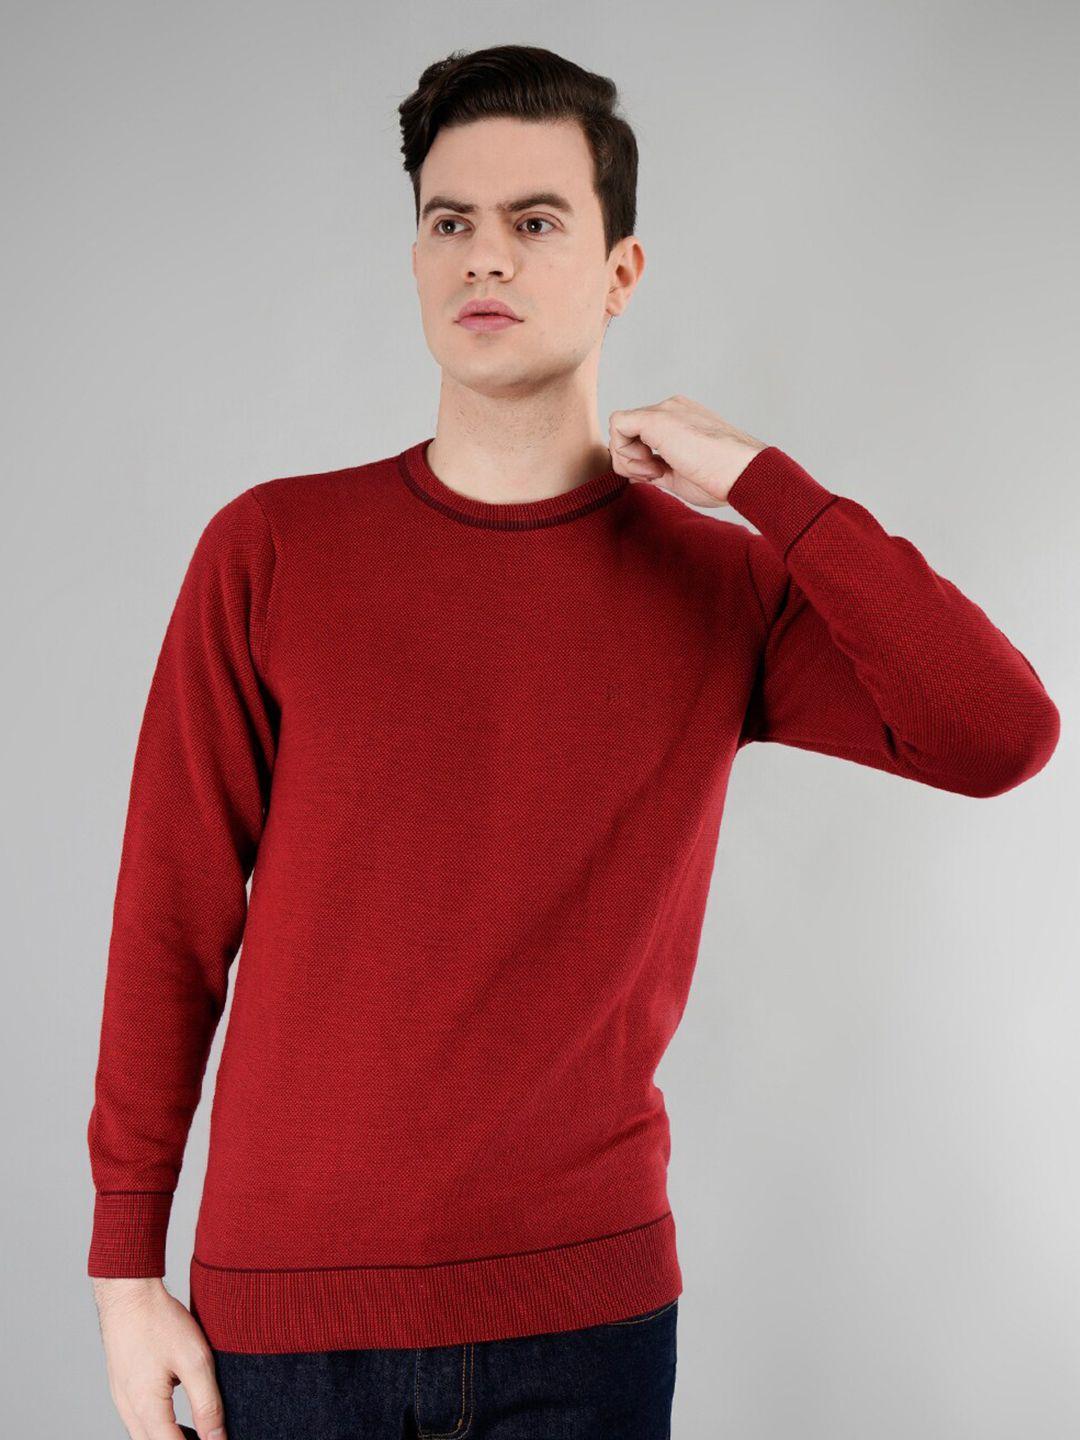 tim paris round neck long sleeves cotton pullover sweater